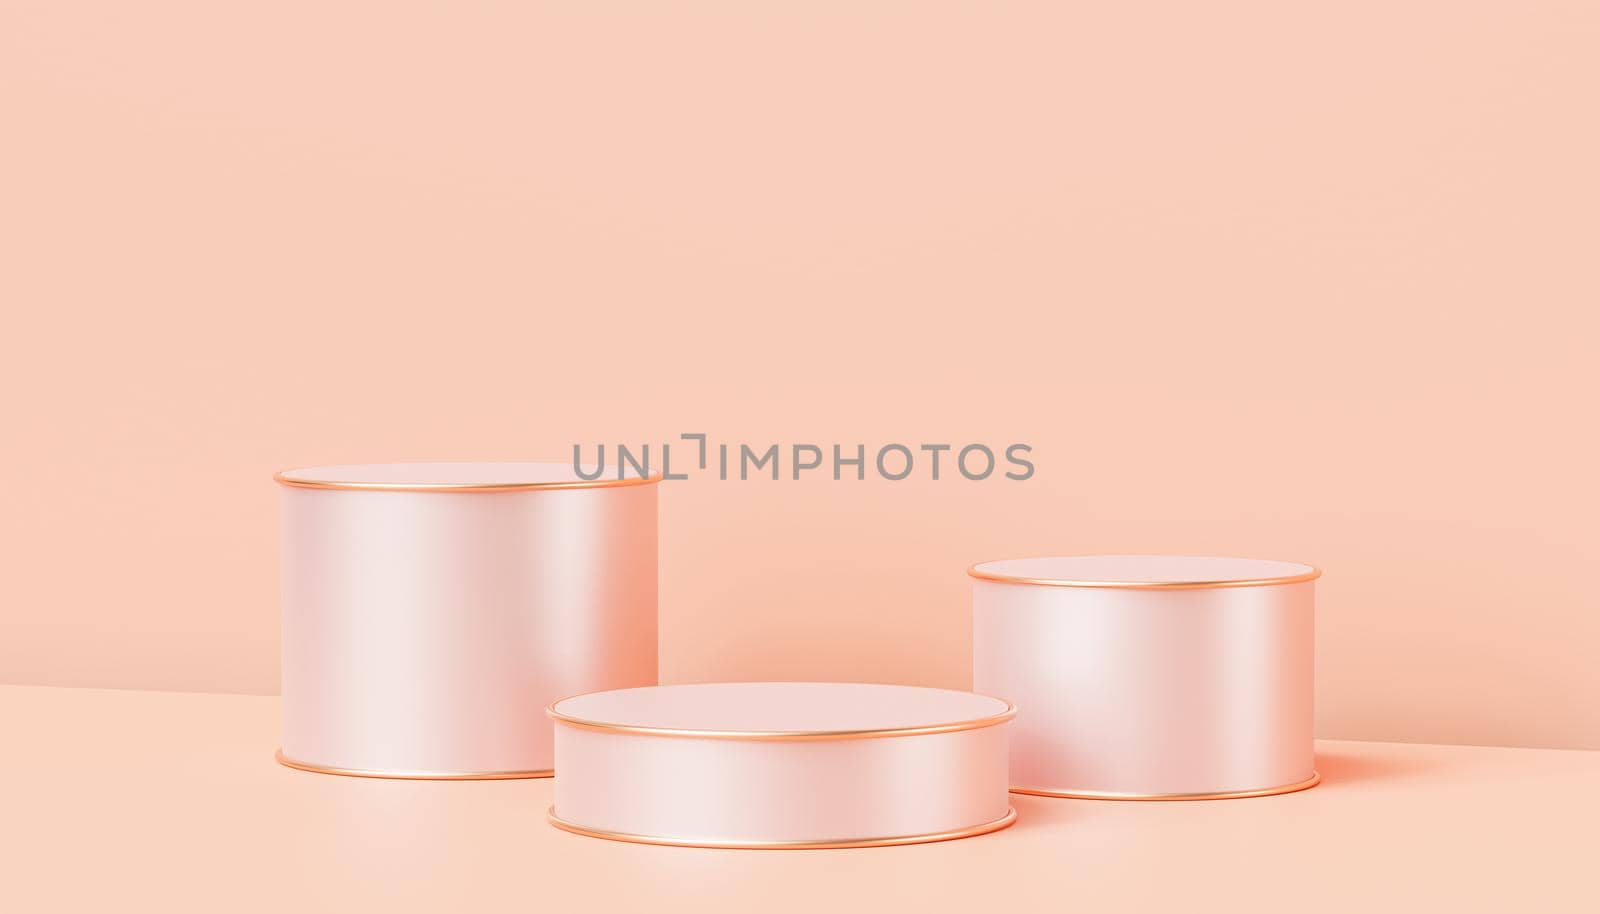 Beige luxury podiums or pedestals for products or advertising on pastel peach colored background, 3d render